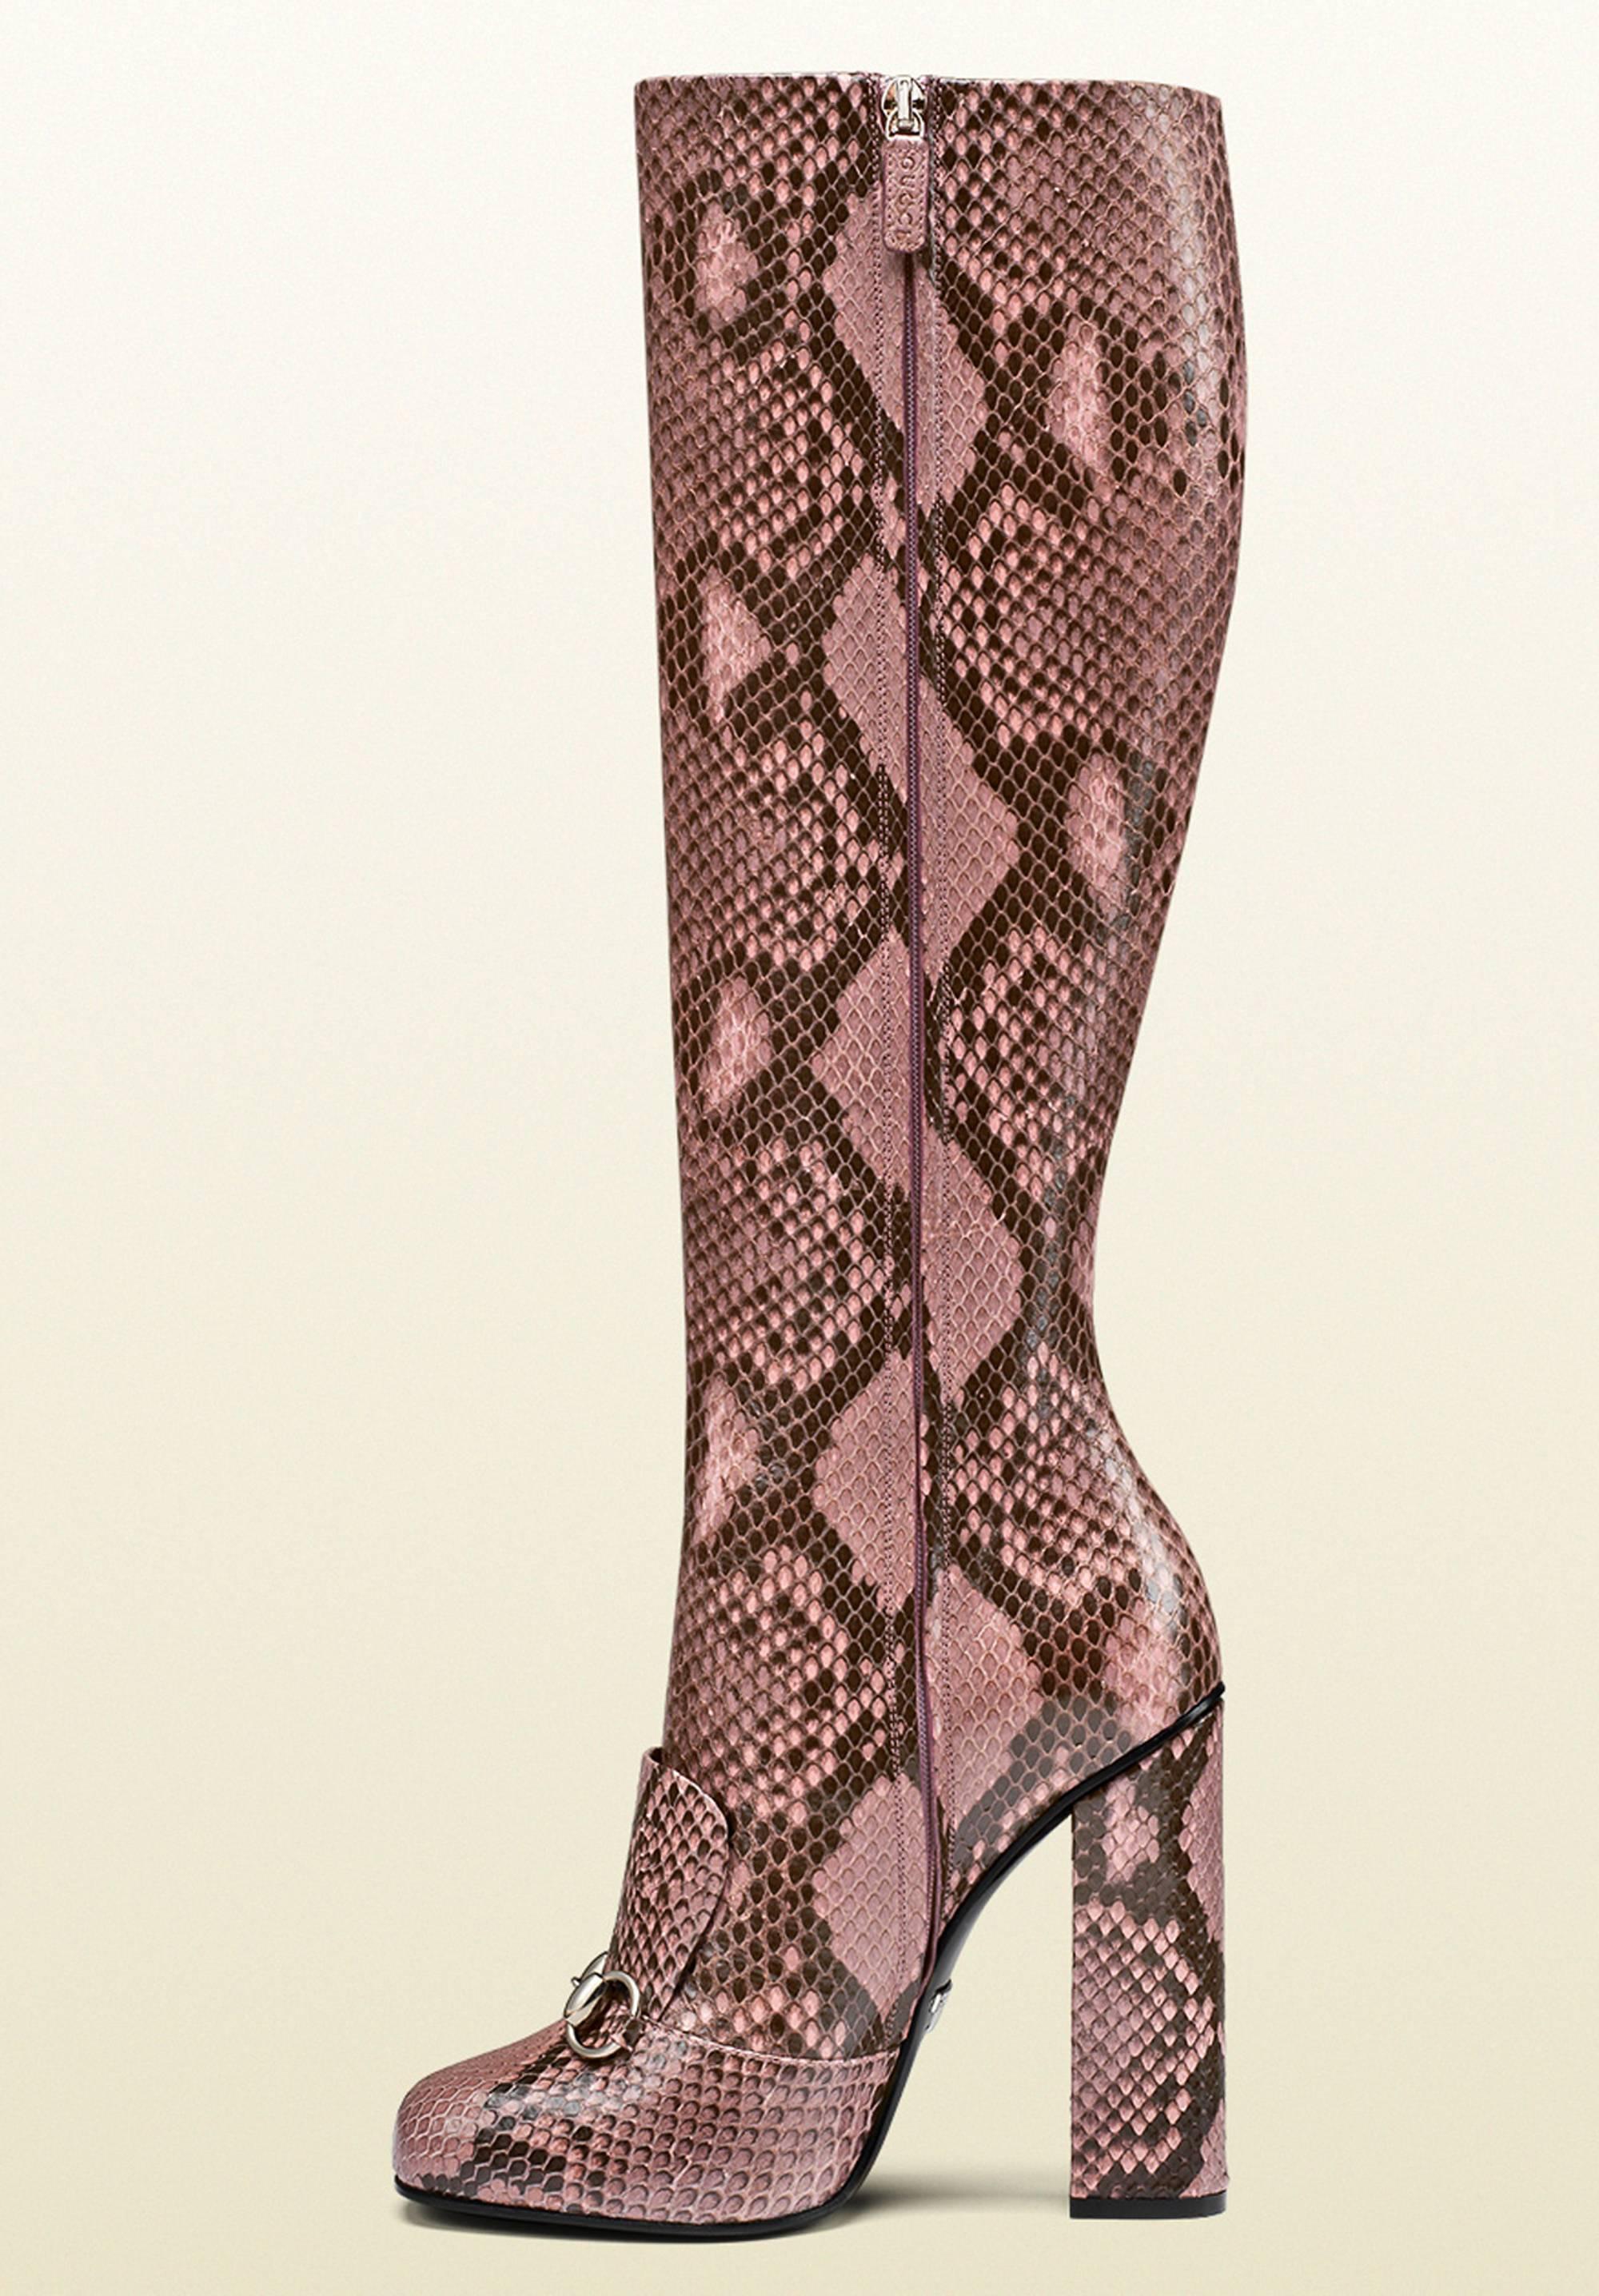 Cut Slim to Showcase Your Legs, The Season's Must-Have Boots Breathe Retro-Tinged Sophistication with Precious Candy-Colored Python and a Chic Stacked Heel.

New GUCCI PYTHON Knee Height Boots
Designer Size It. 36.5 - US 37    ( Run have a size